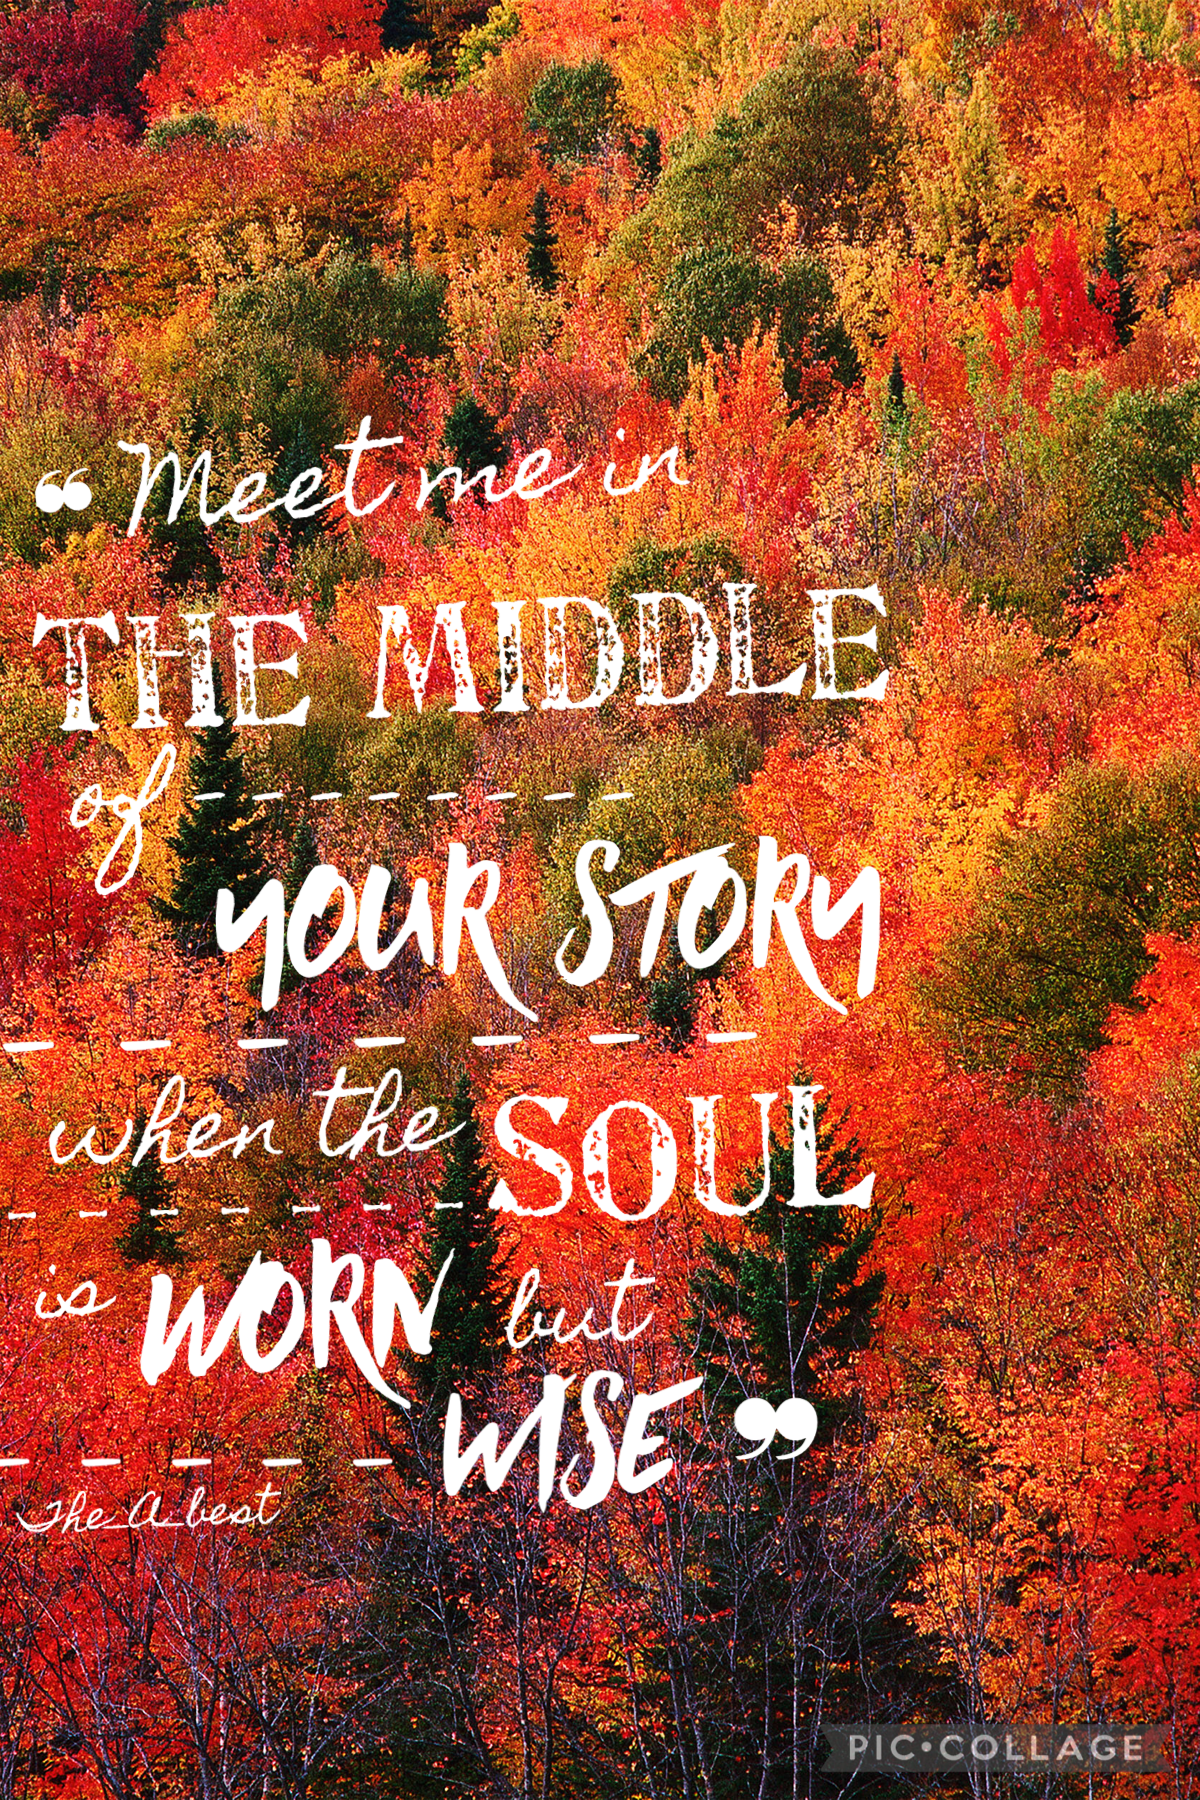 Fall quote